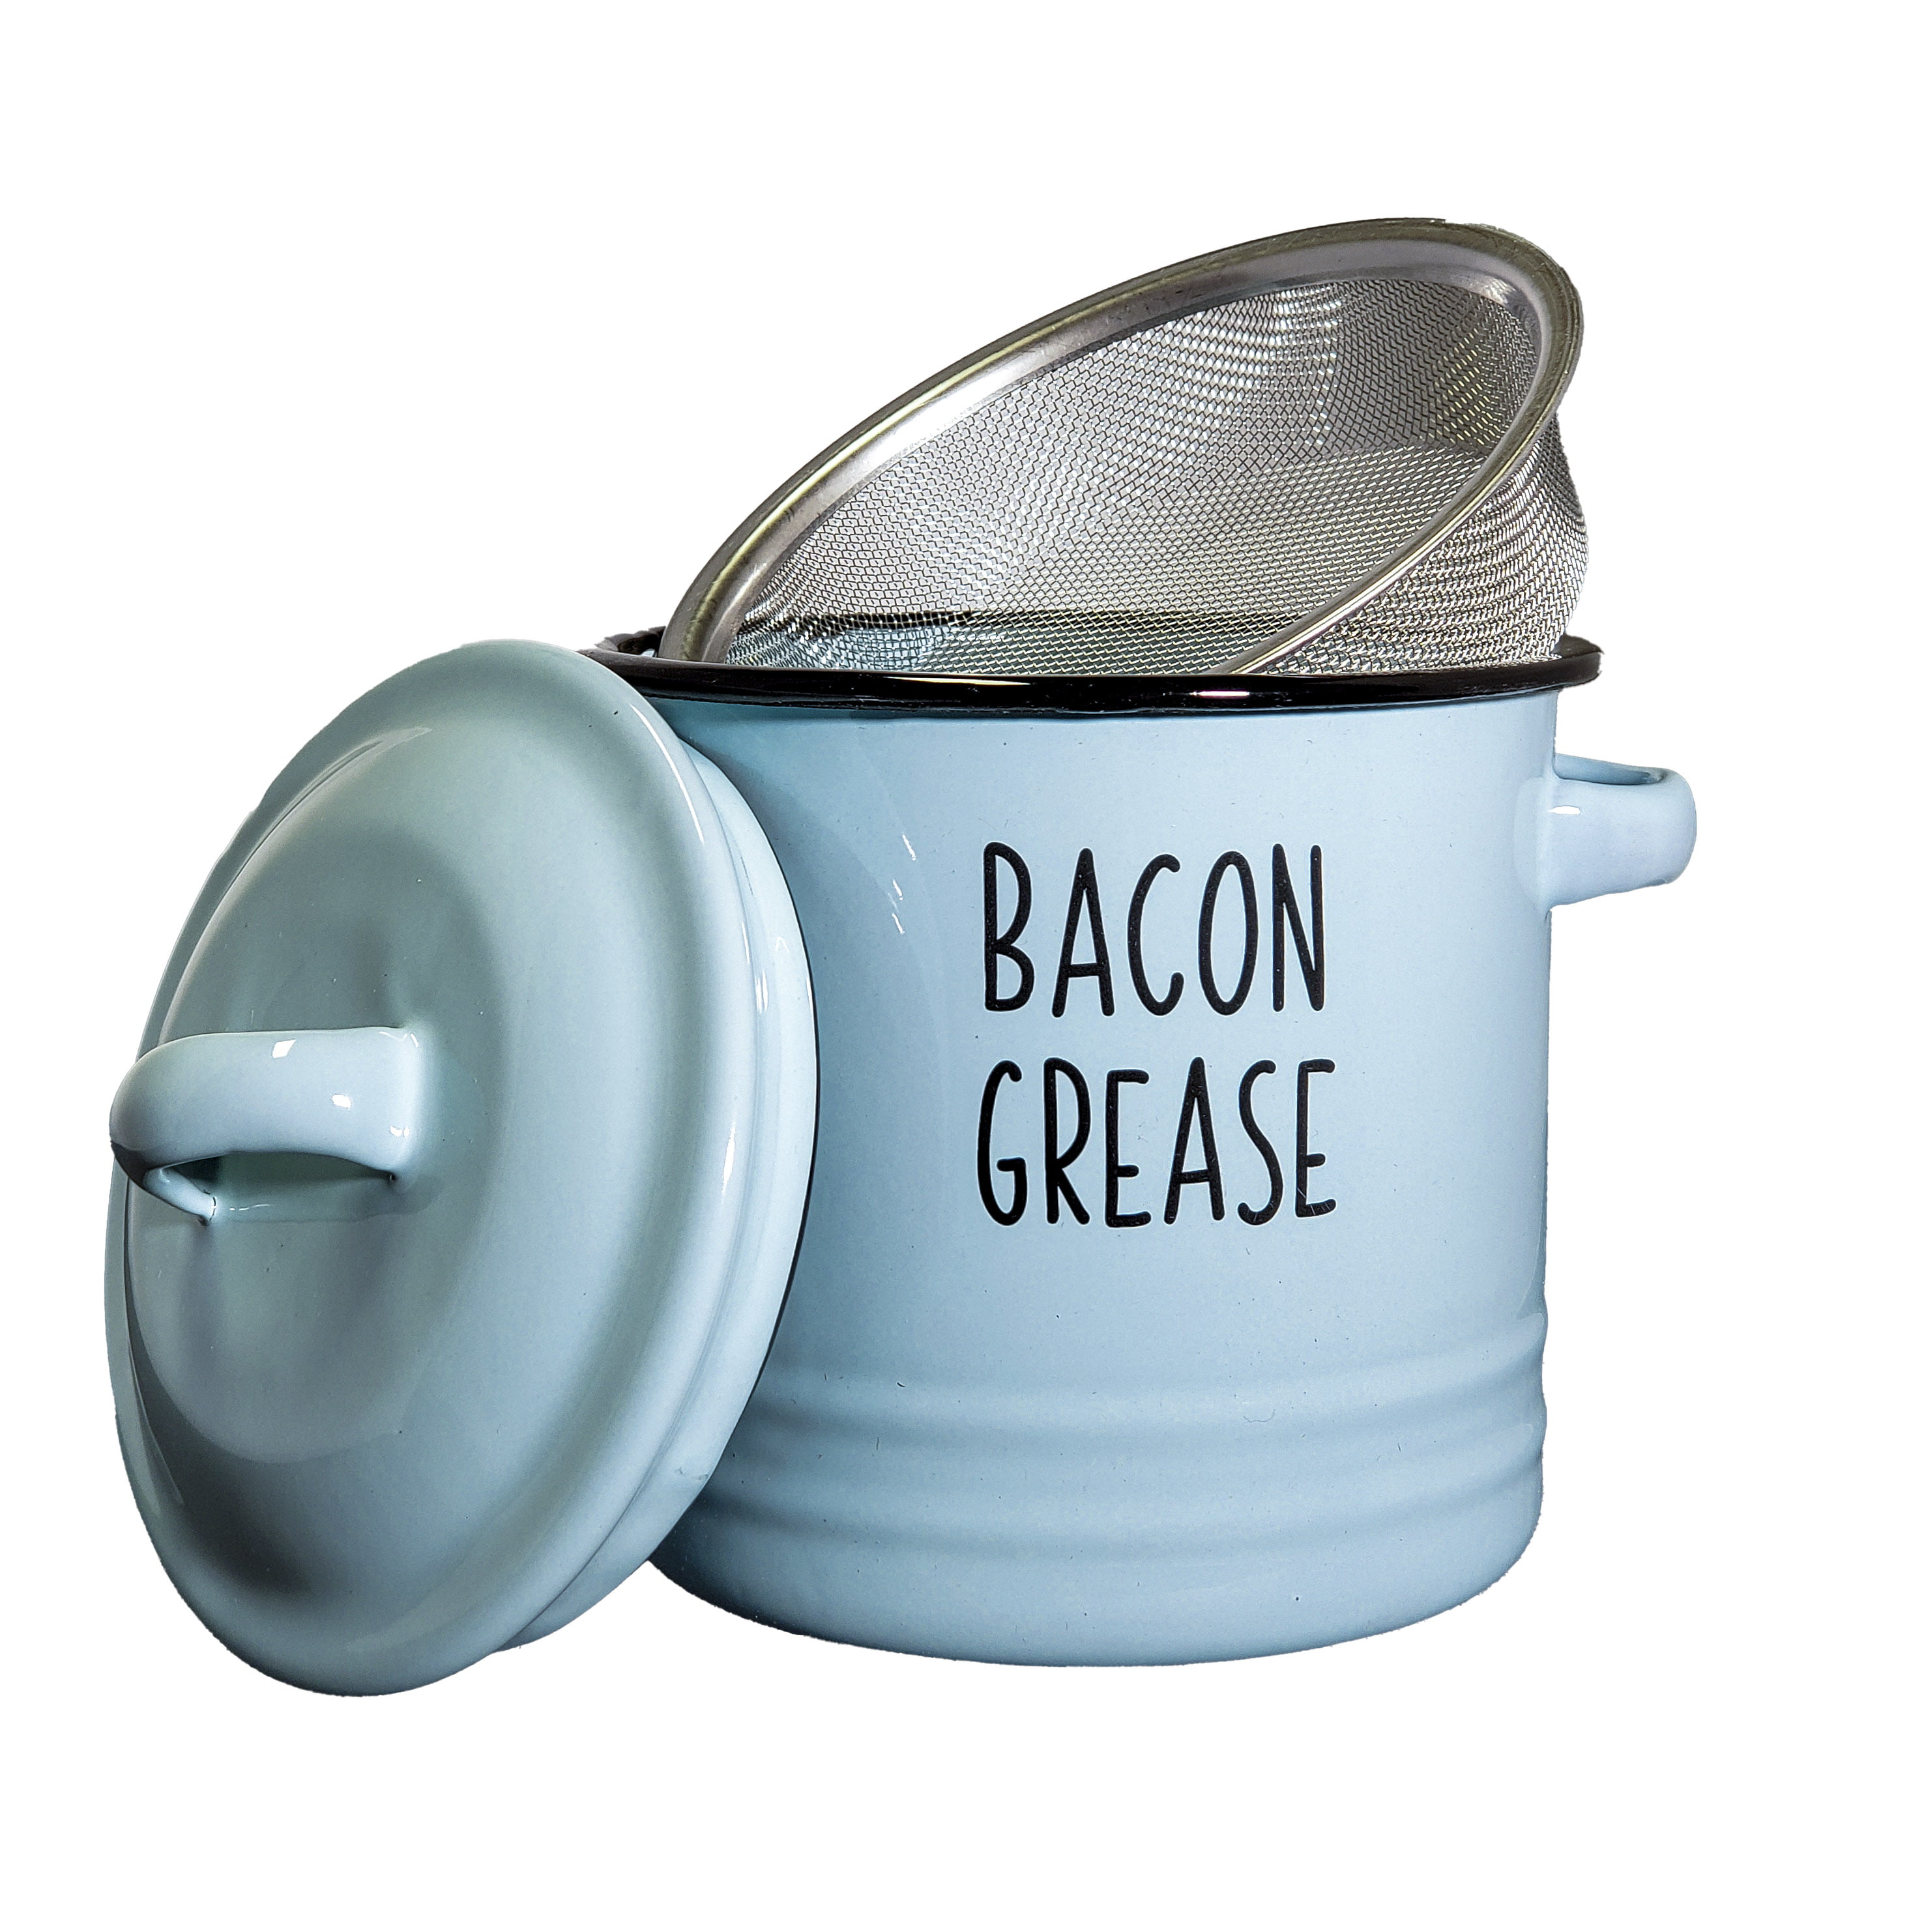 Bacon Grease Container with strainer - rustic mid-century modern Black